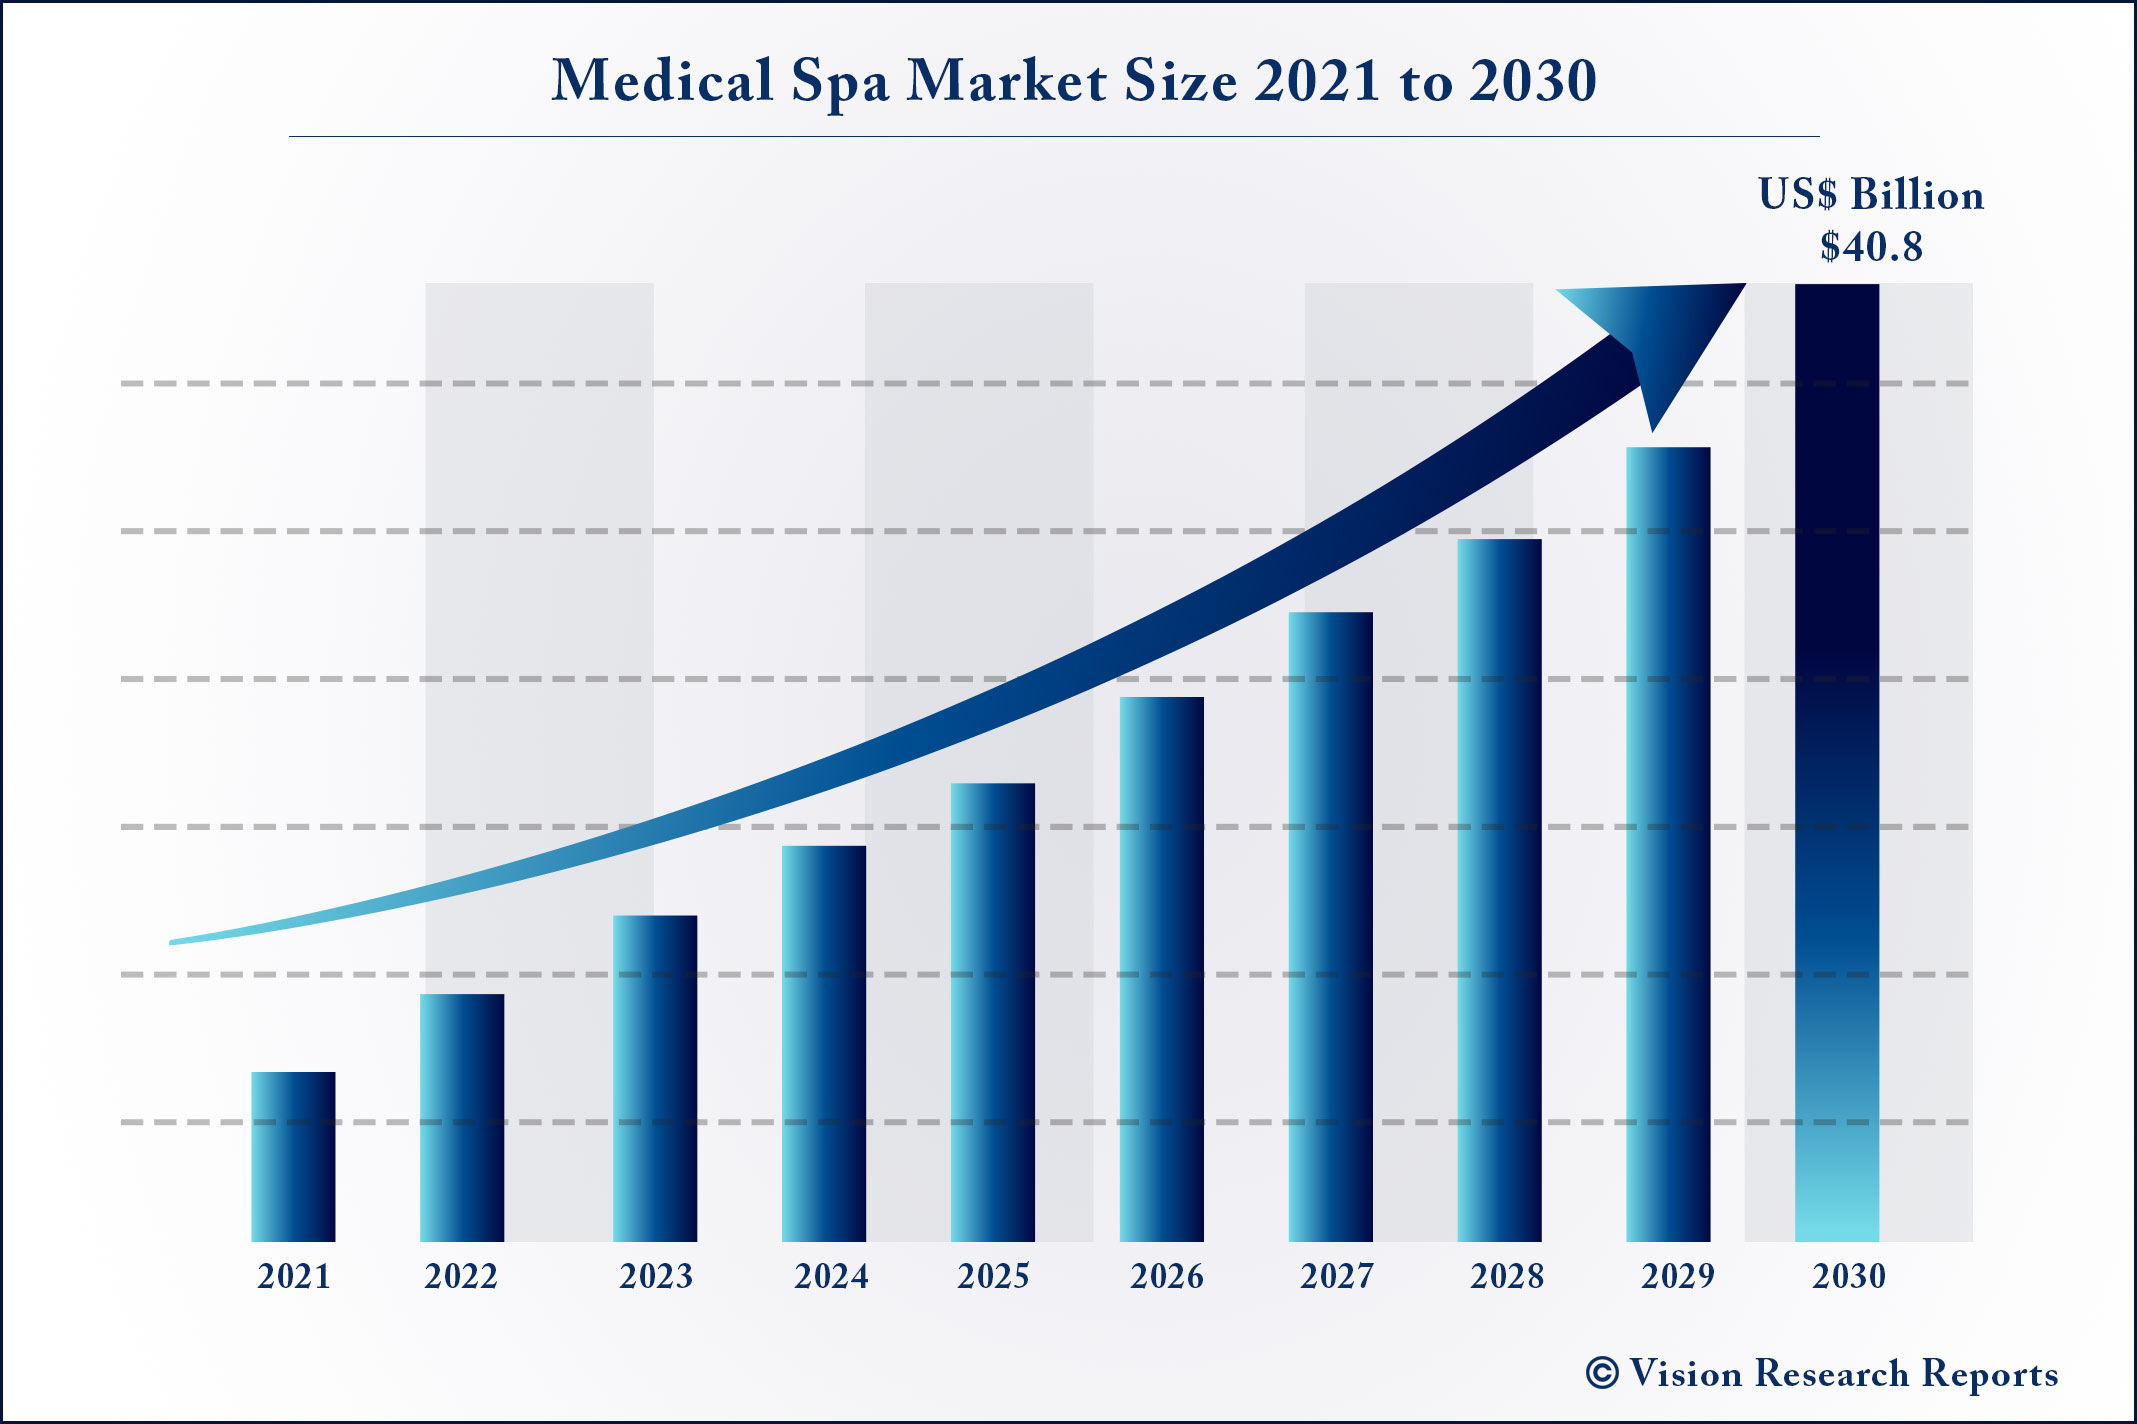 Medical Spa Market Size 2021 to 2030